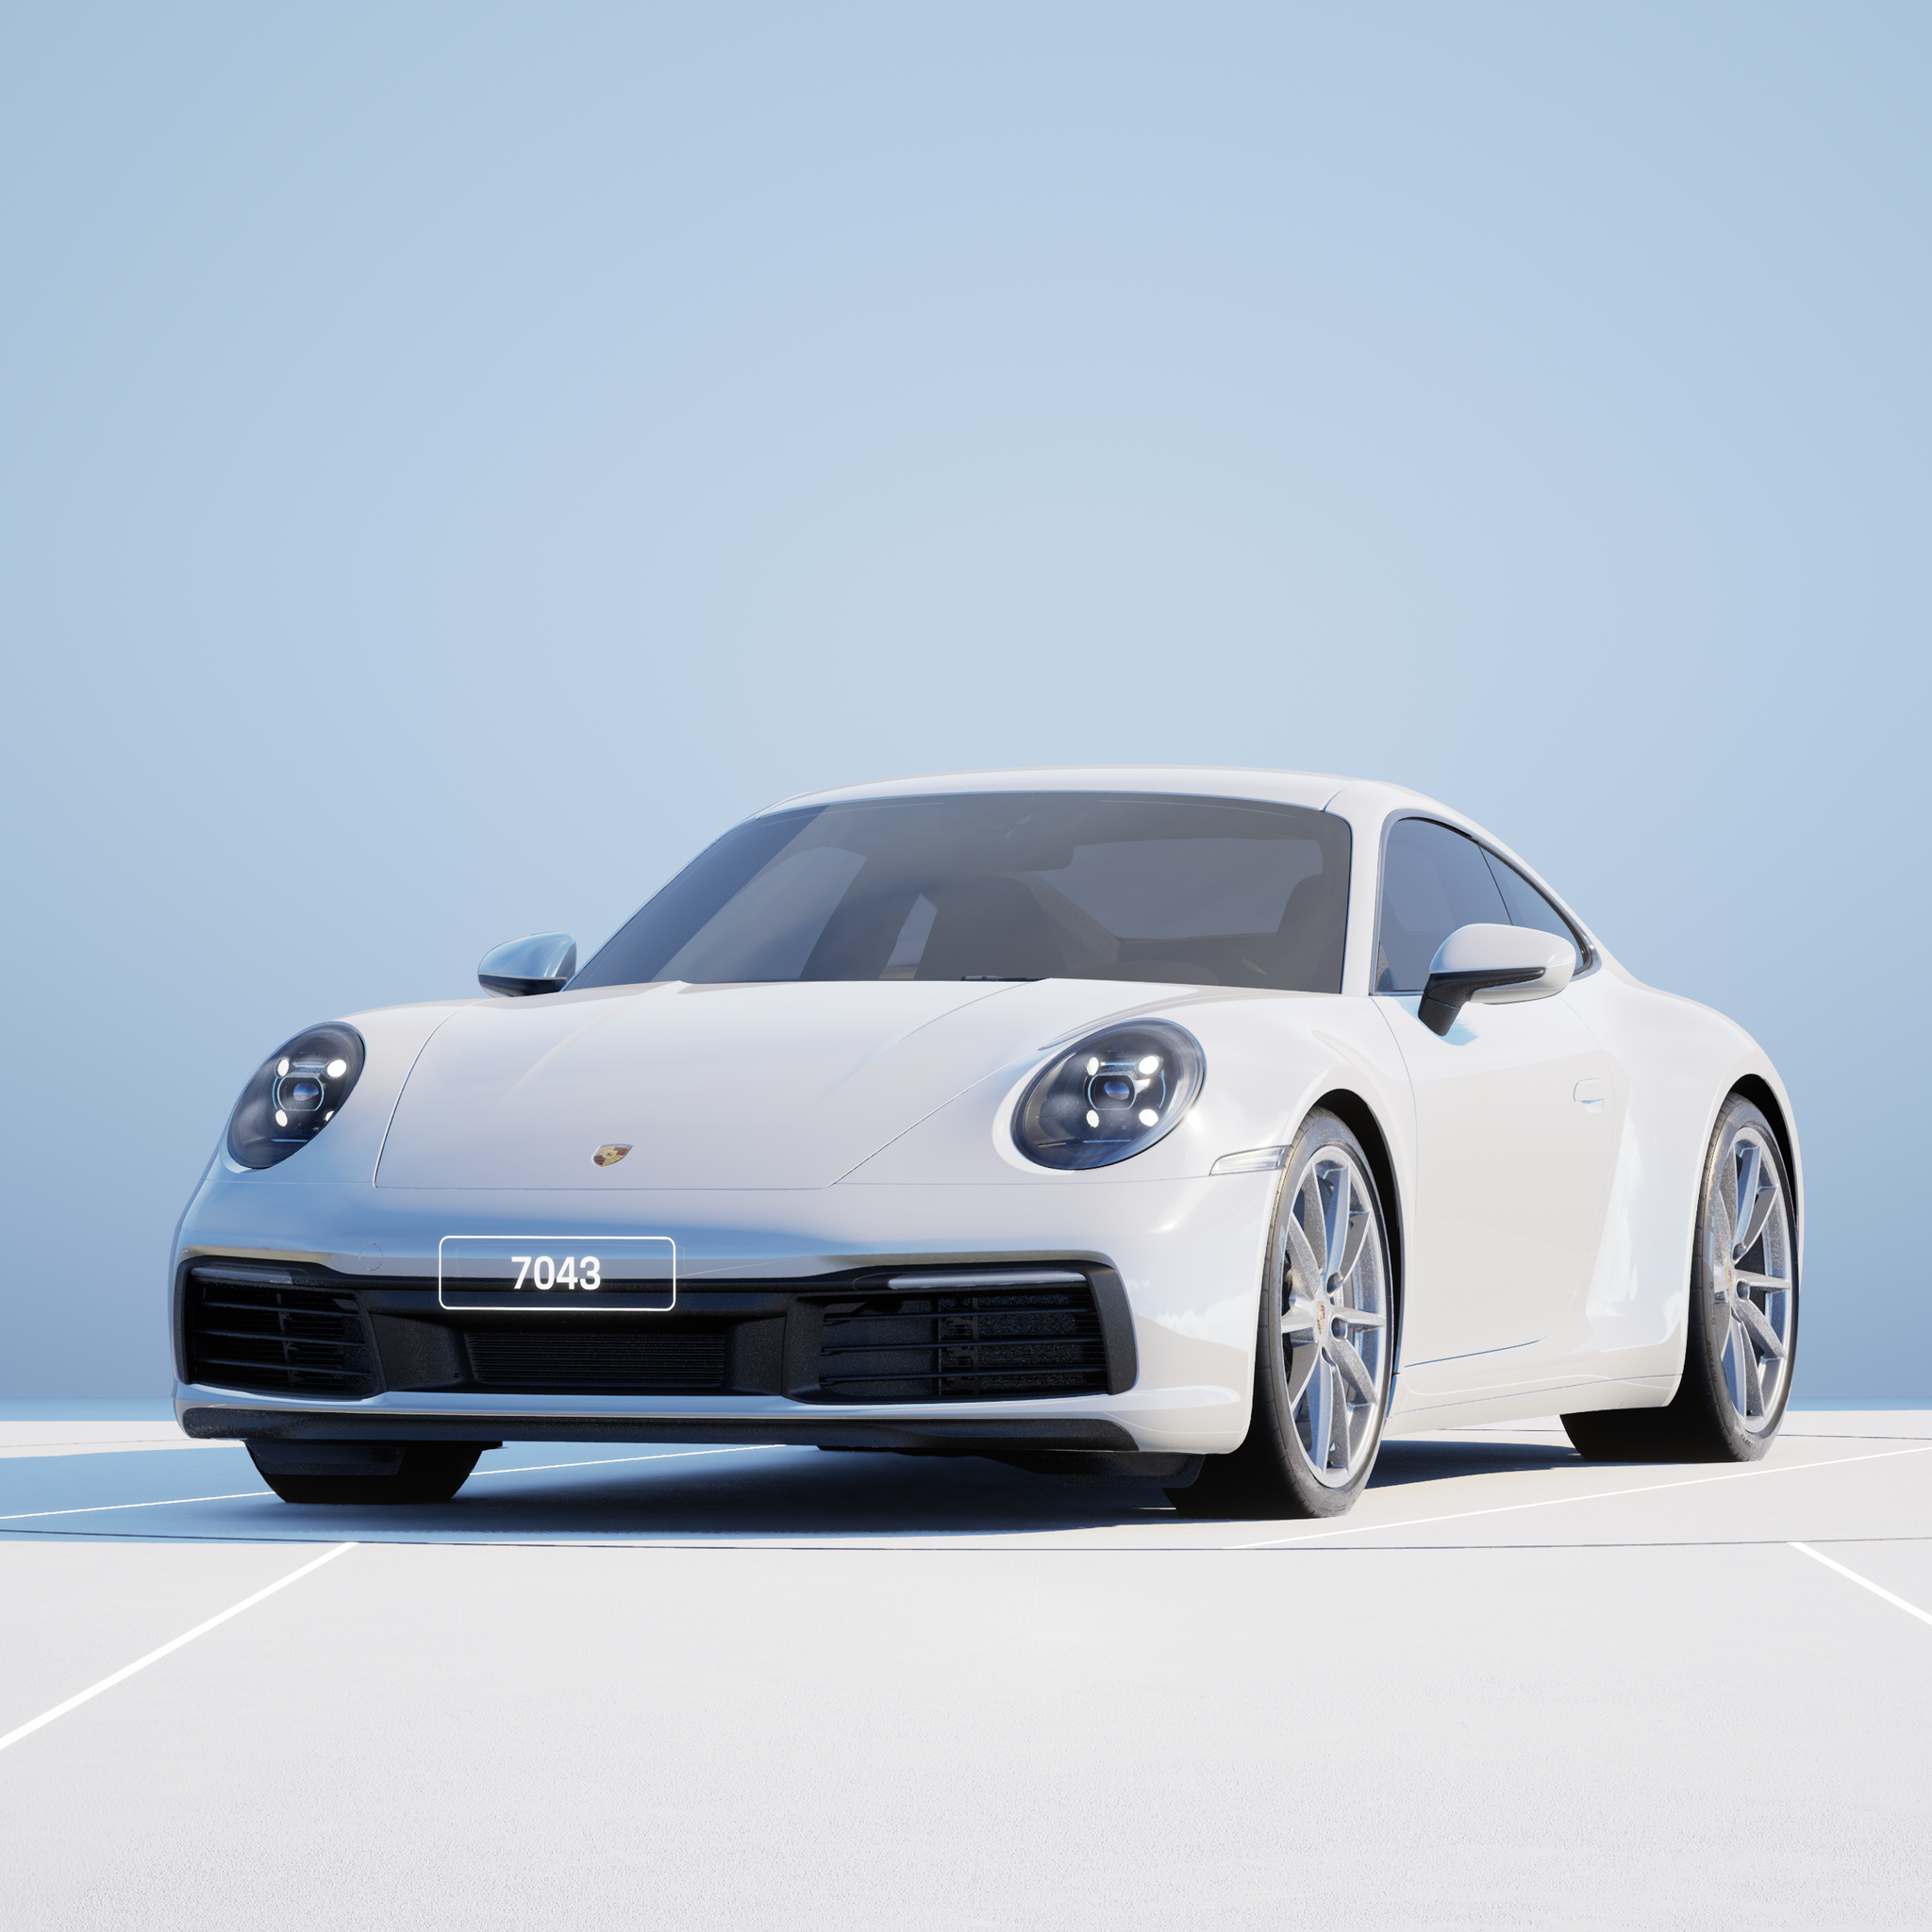 The PORSCHΞ 911 7043 image in phase